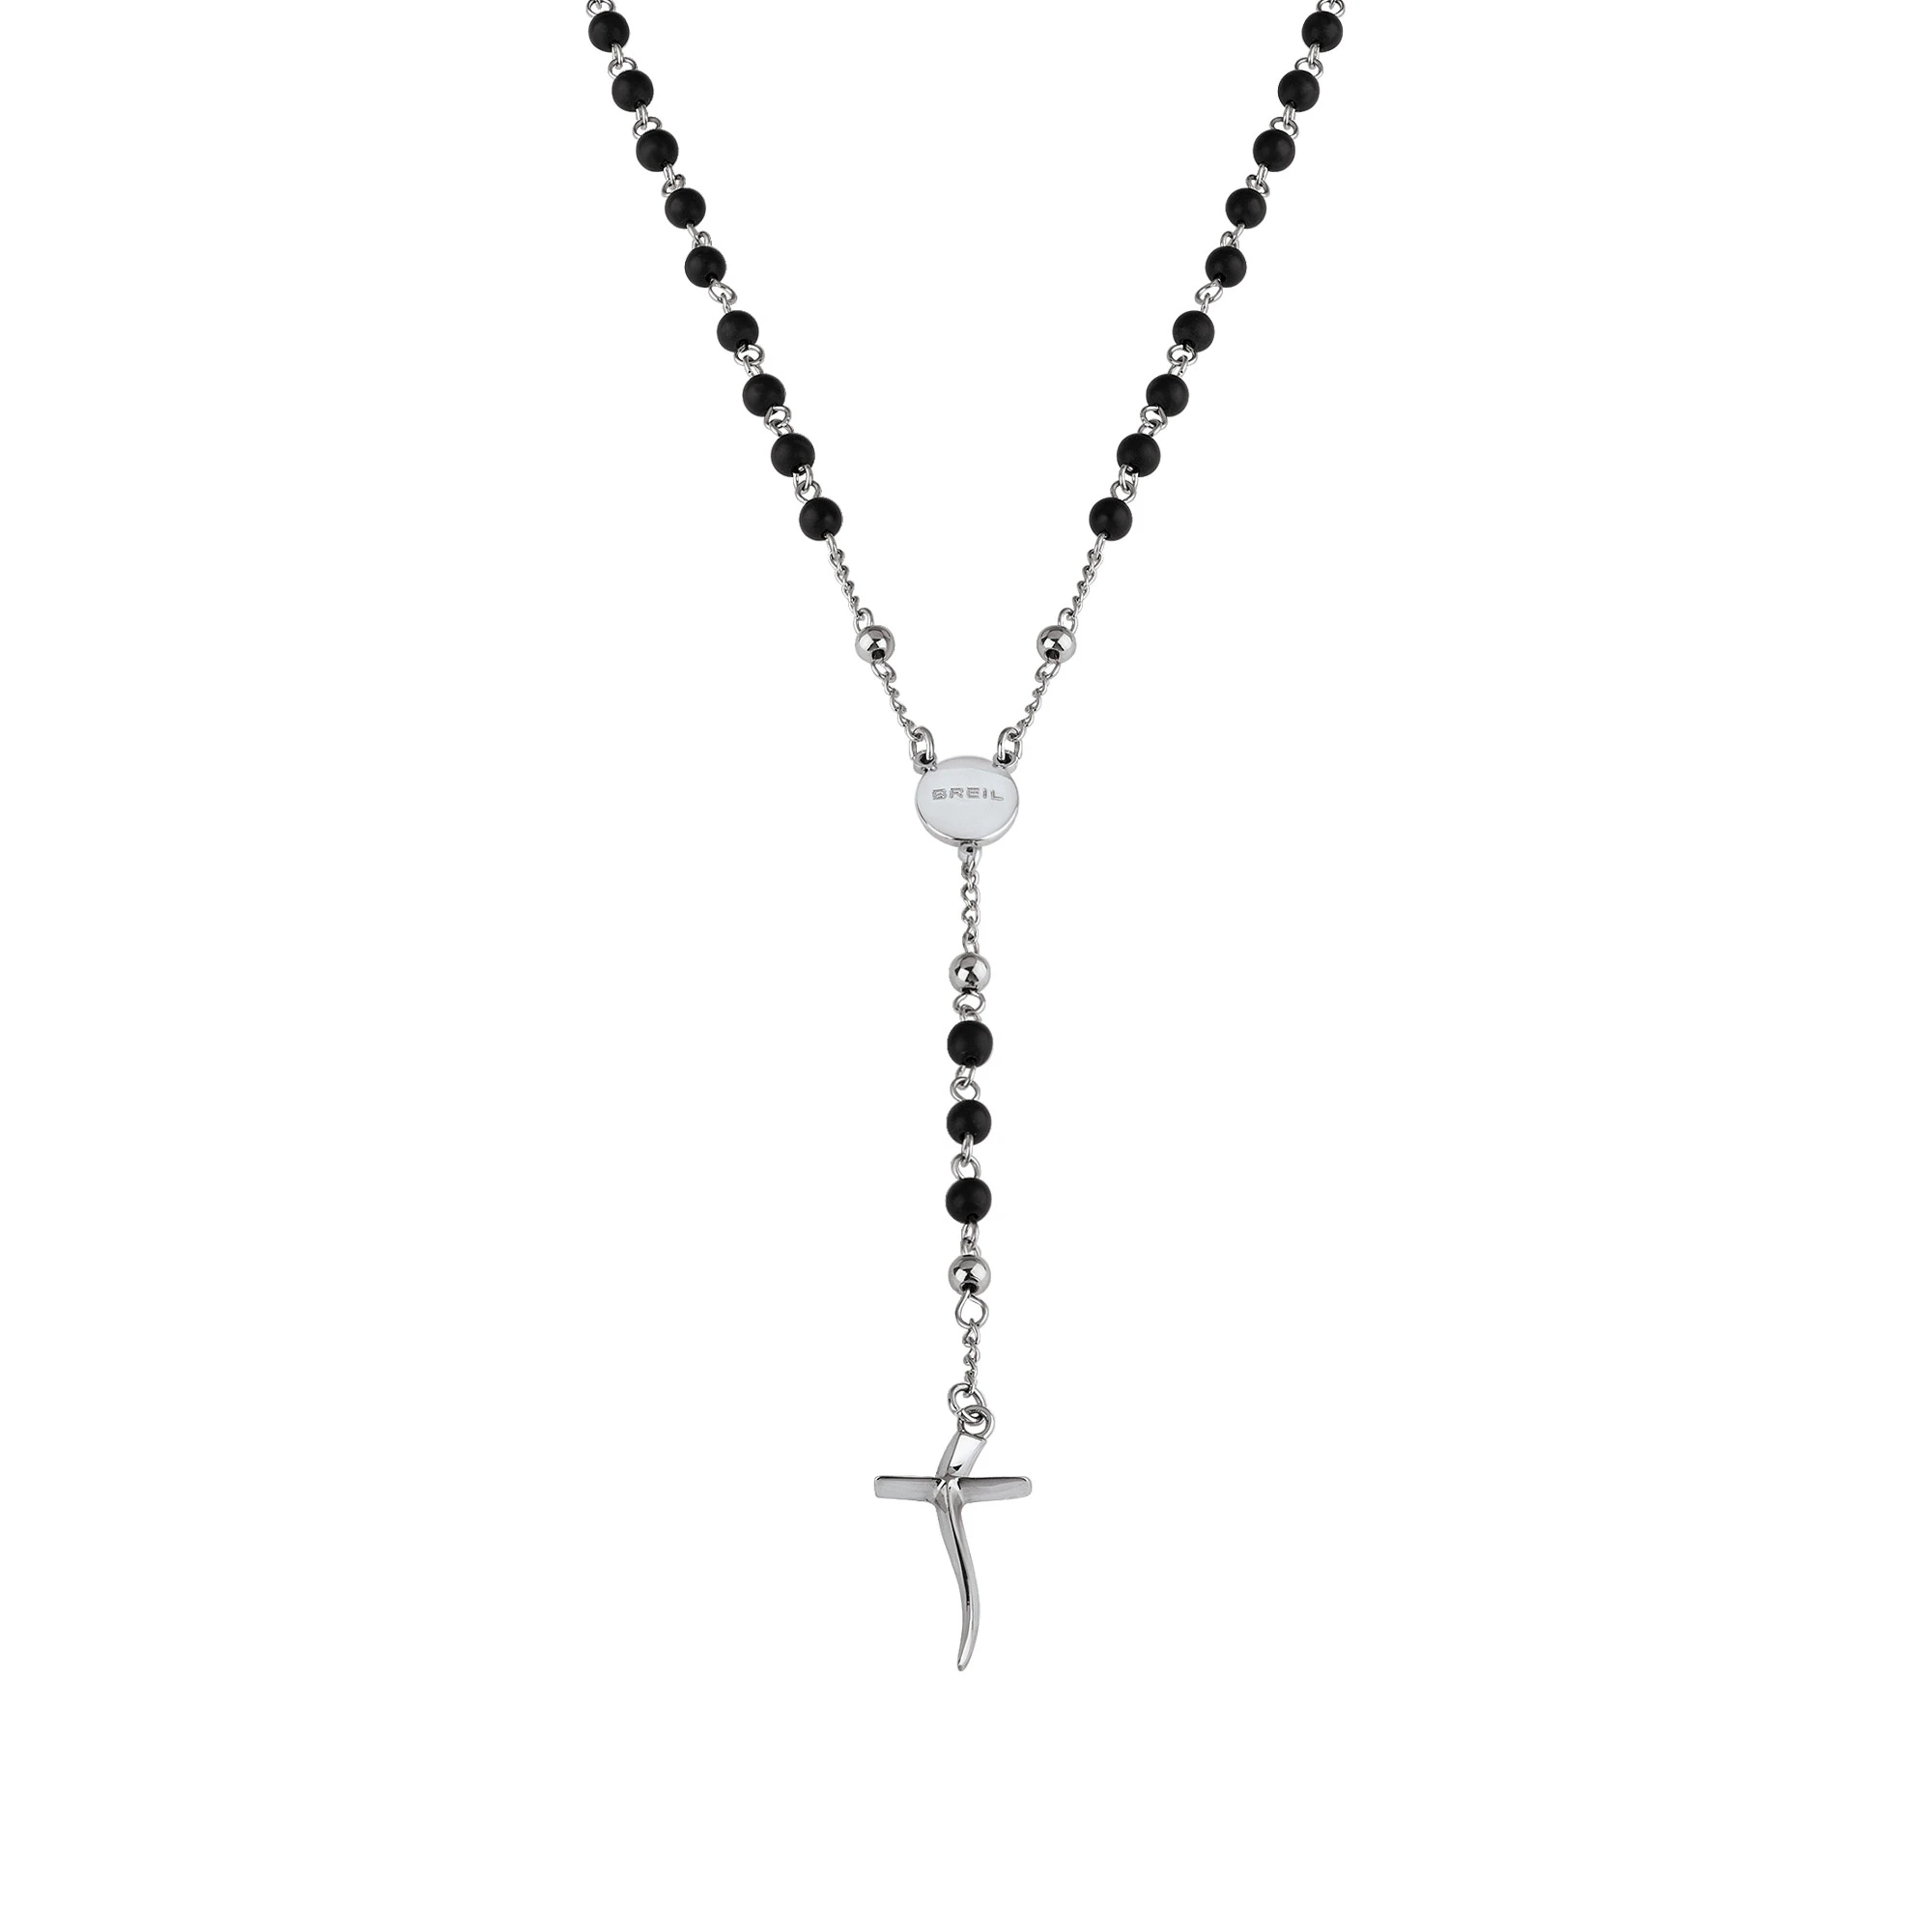 CODE - ONIX AND STAINLESS STEEL NECKLACE - 1 - TJ2990 | Breil